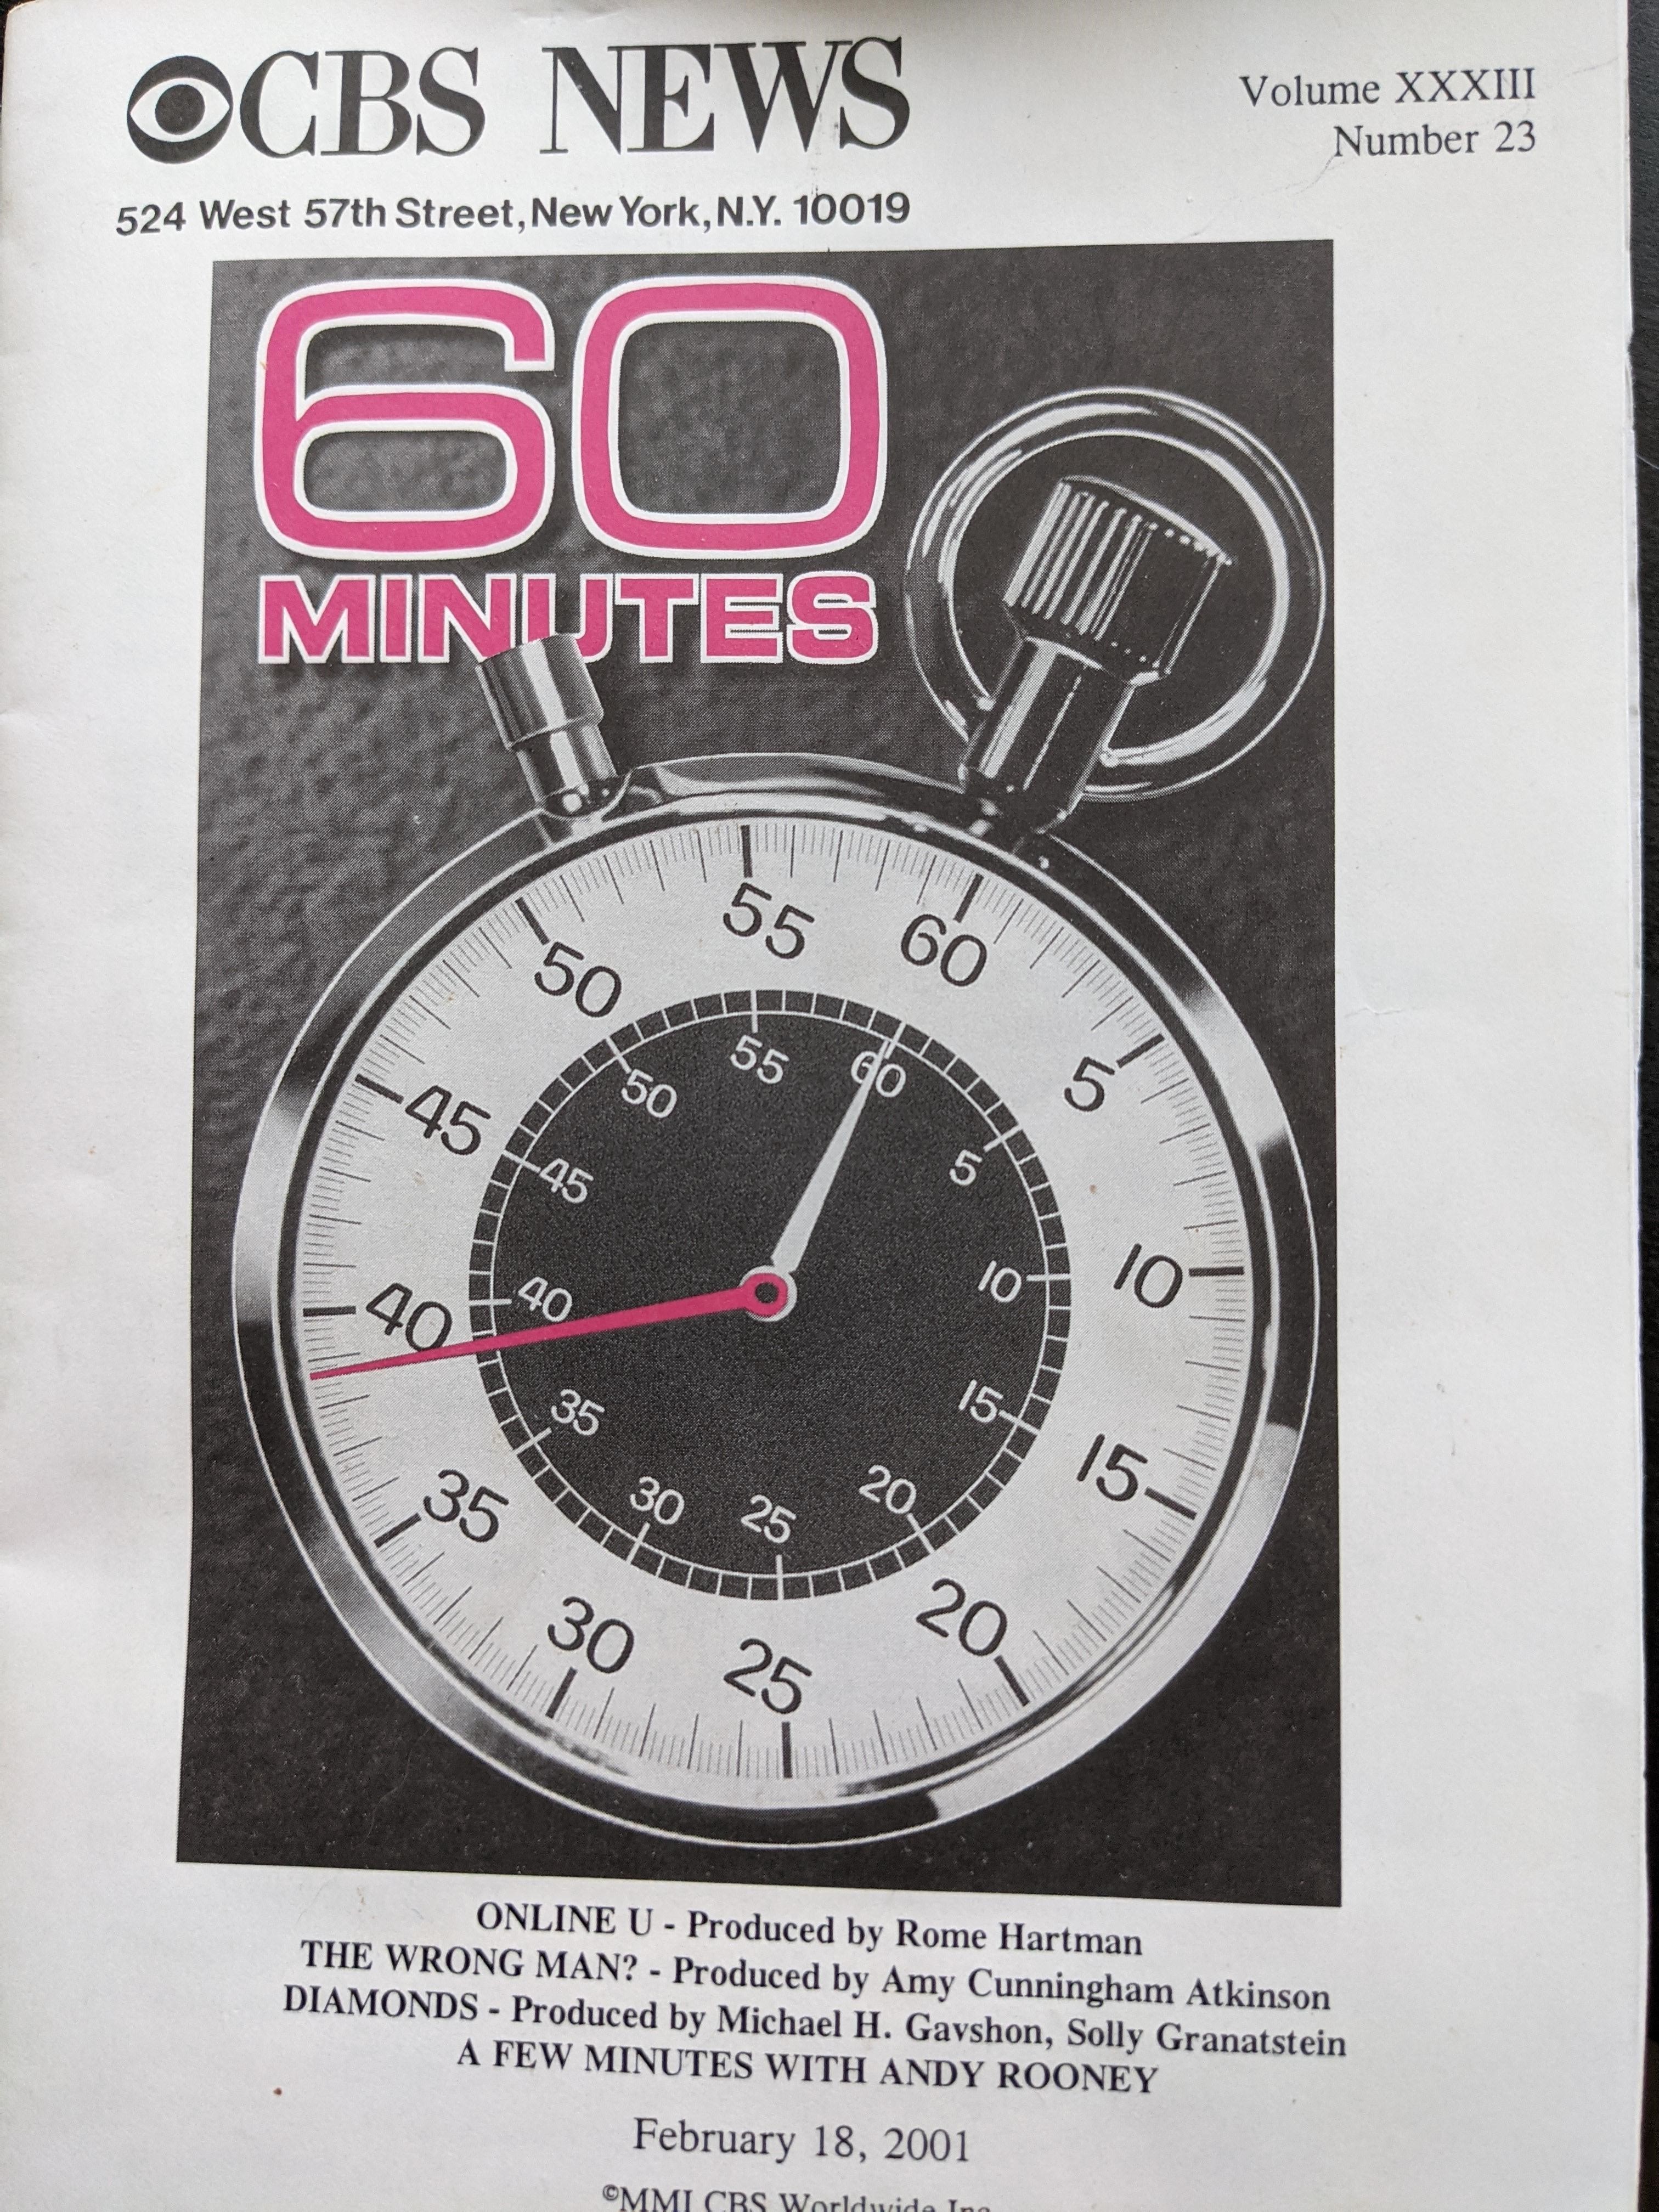 Cover of the transcript. shows the 60 minutes logo and the name of the segment (Online U)